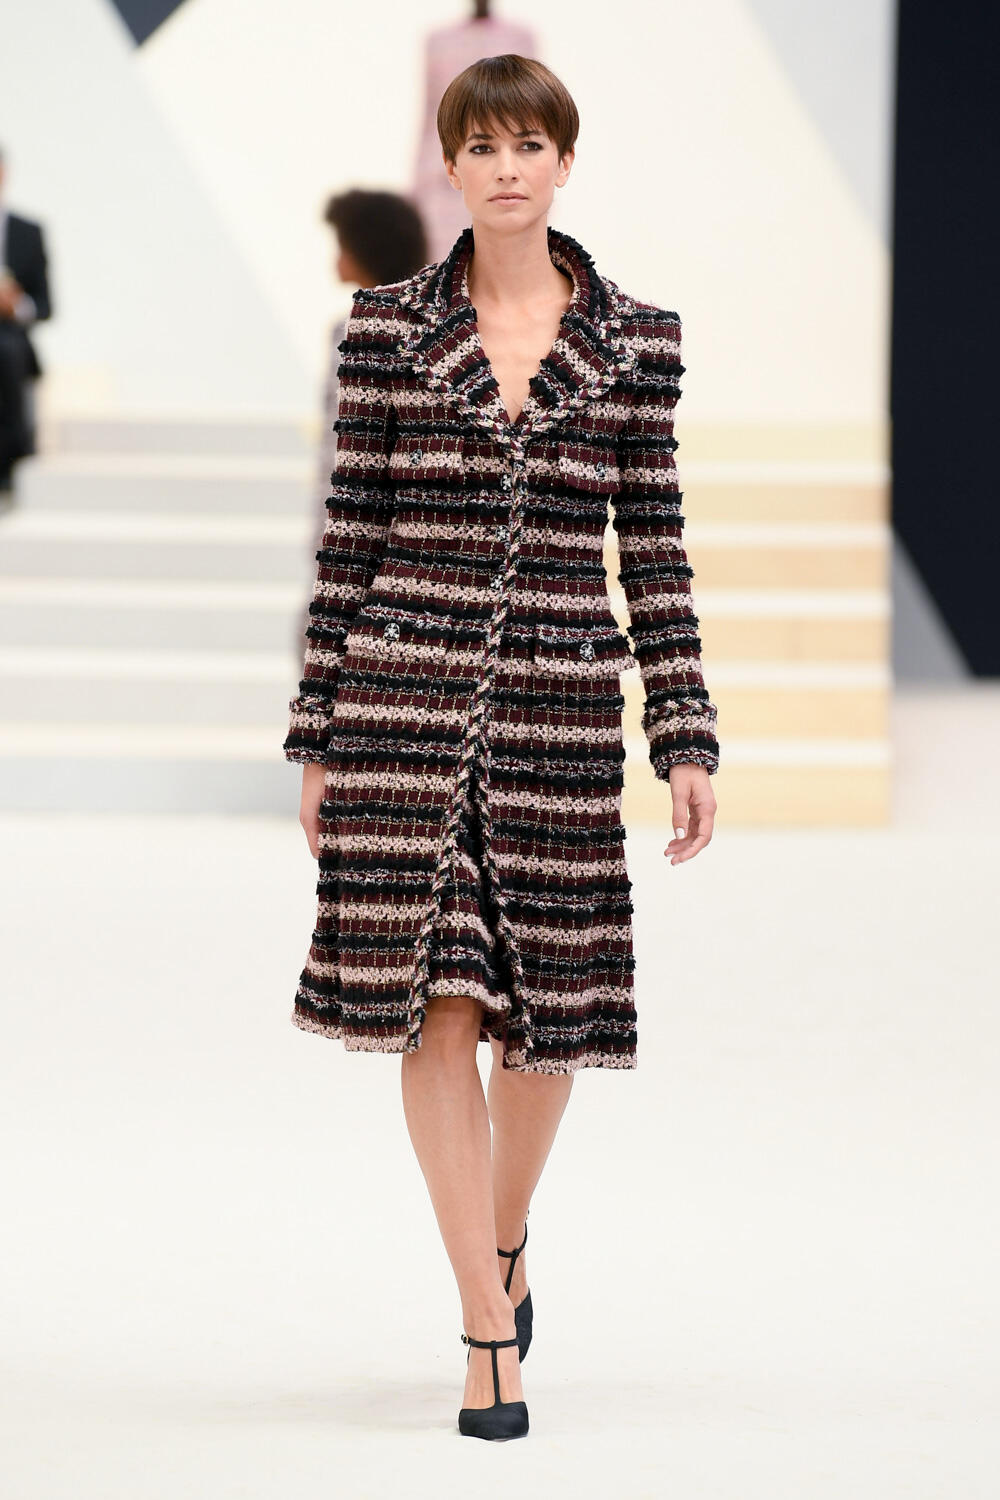 Chanel Fall 2022 Couture Fashion Show